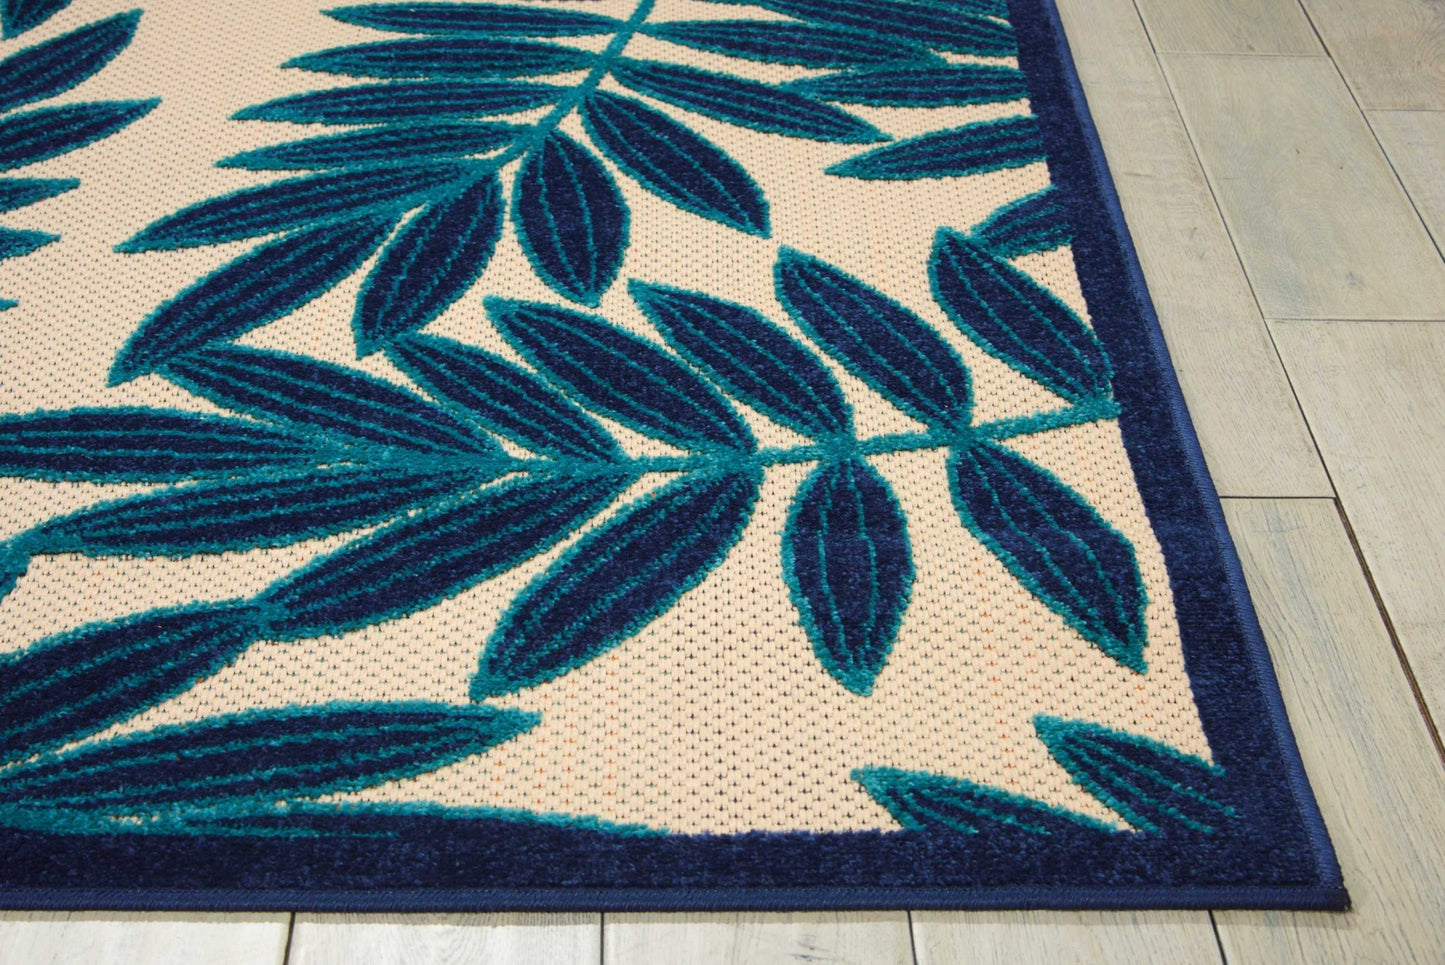 3' X 4' Blue And Ivory Floral Indoor Outdoor Area Rug